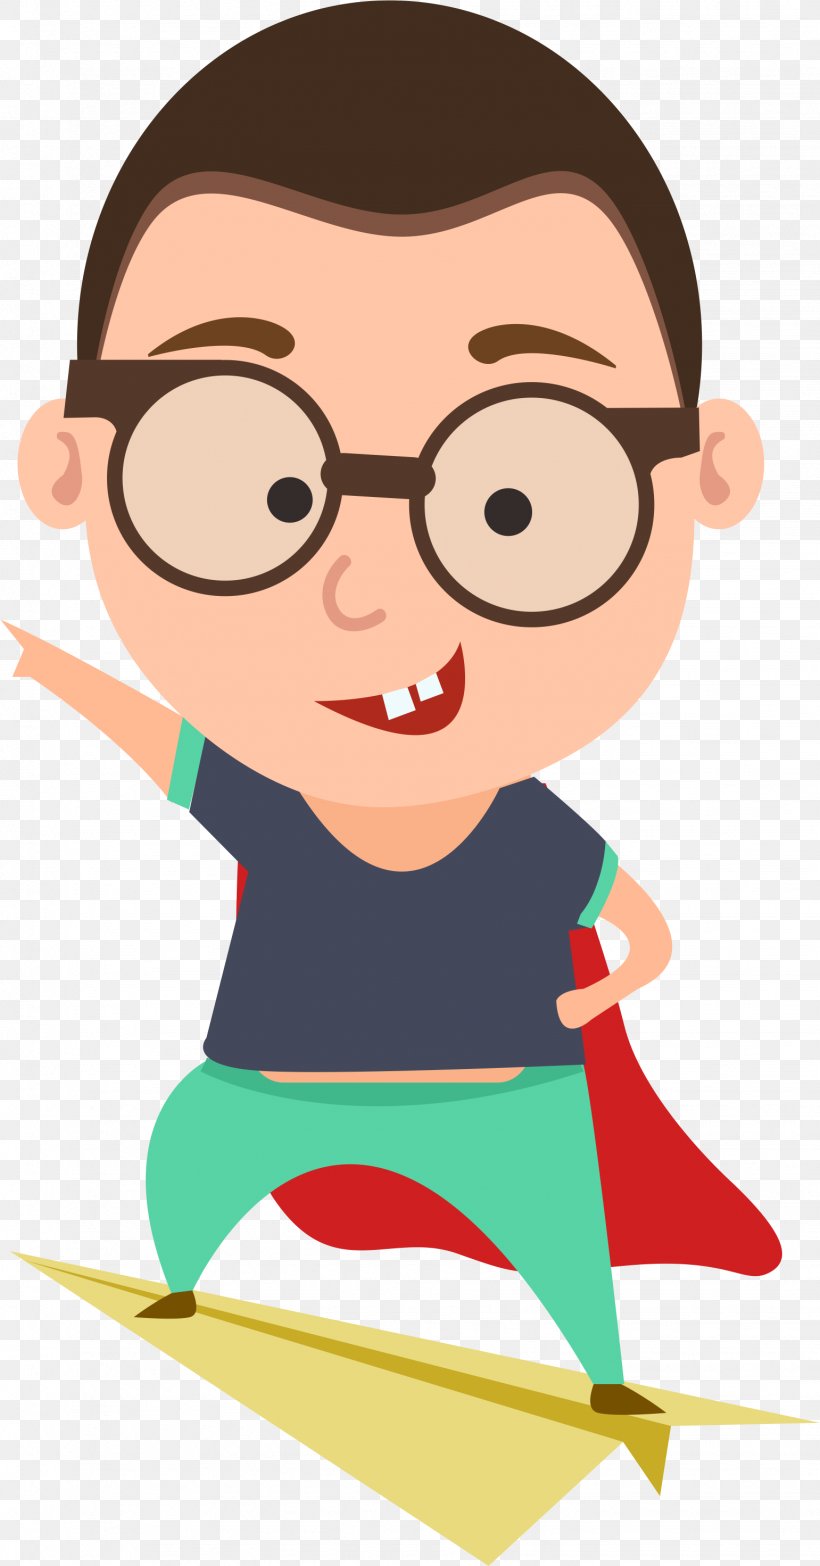 Superman Illustration Image Clip Art, PNG, 1541x2943px, Superman, Animation, Cartoon, Character, Child Download Free